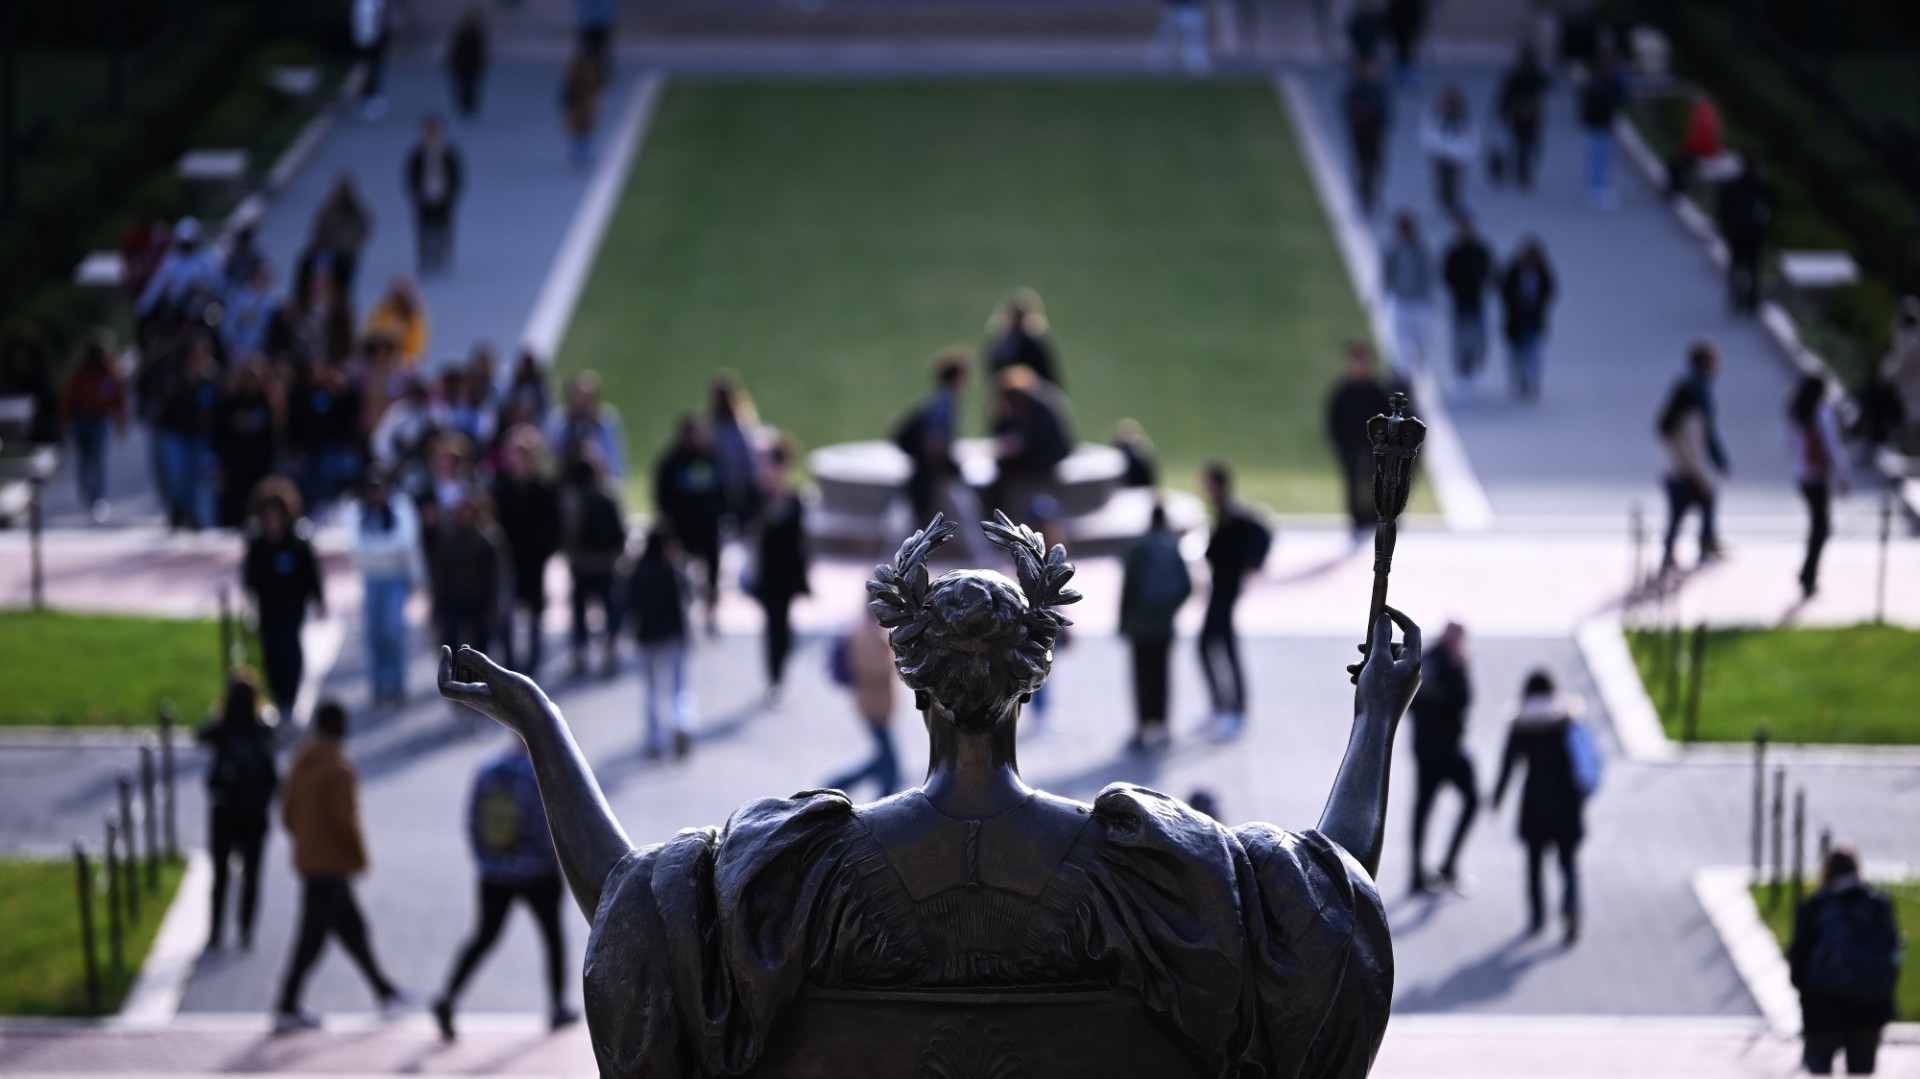 People walking around on Columbia's campus, against the backdrop of the statue of Alma Mater